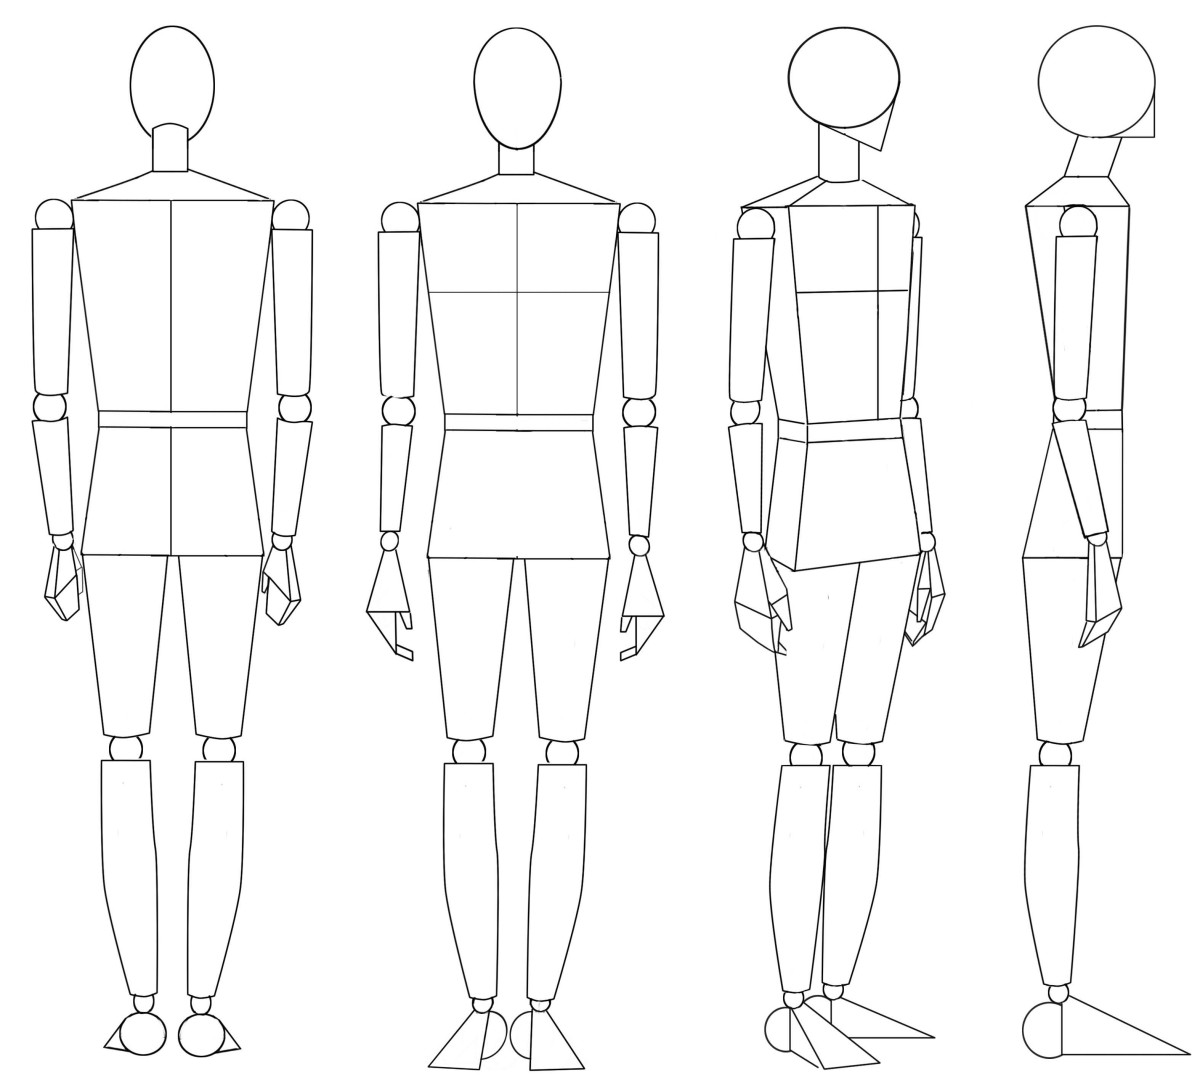 drawing-the-human-figure-angles-proportions